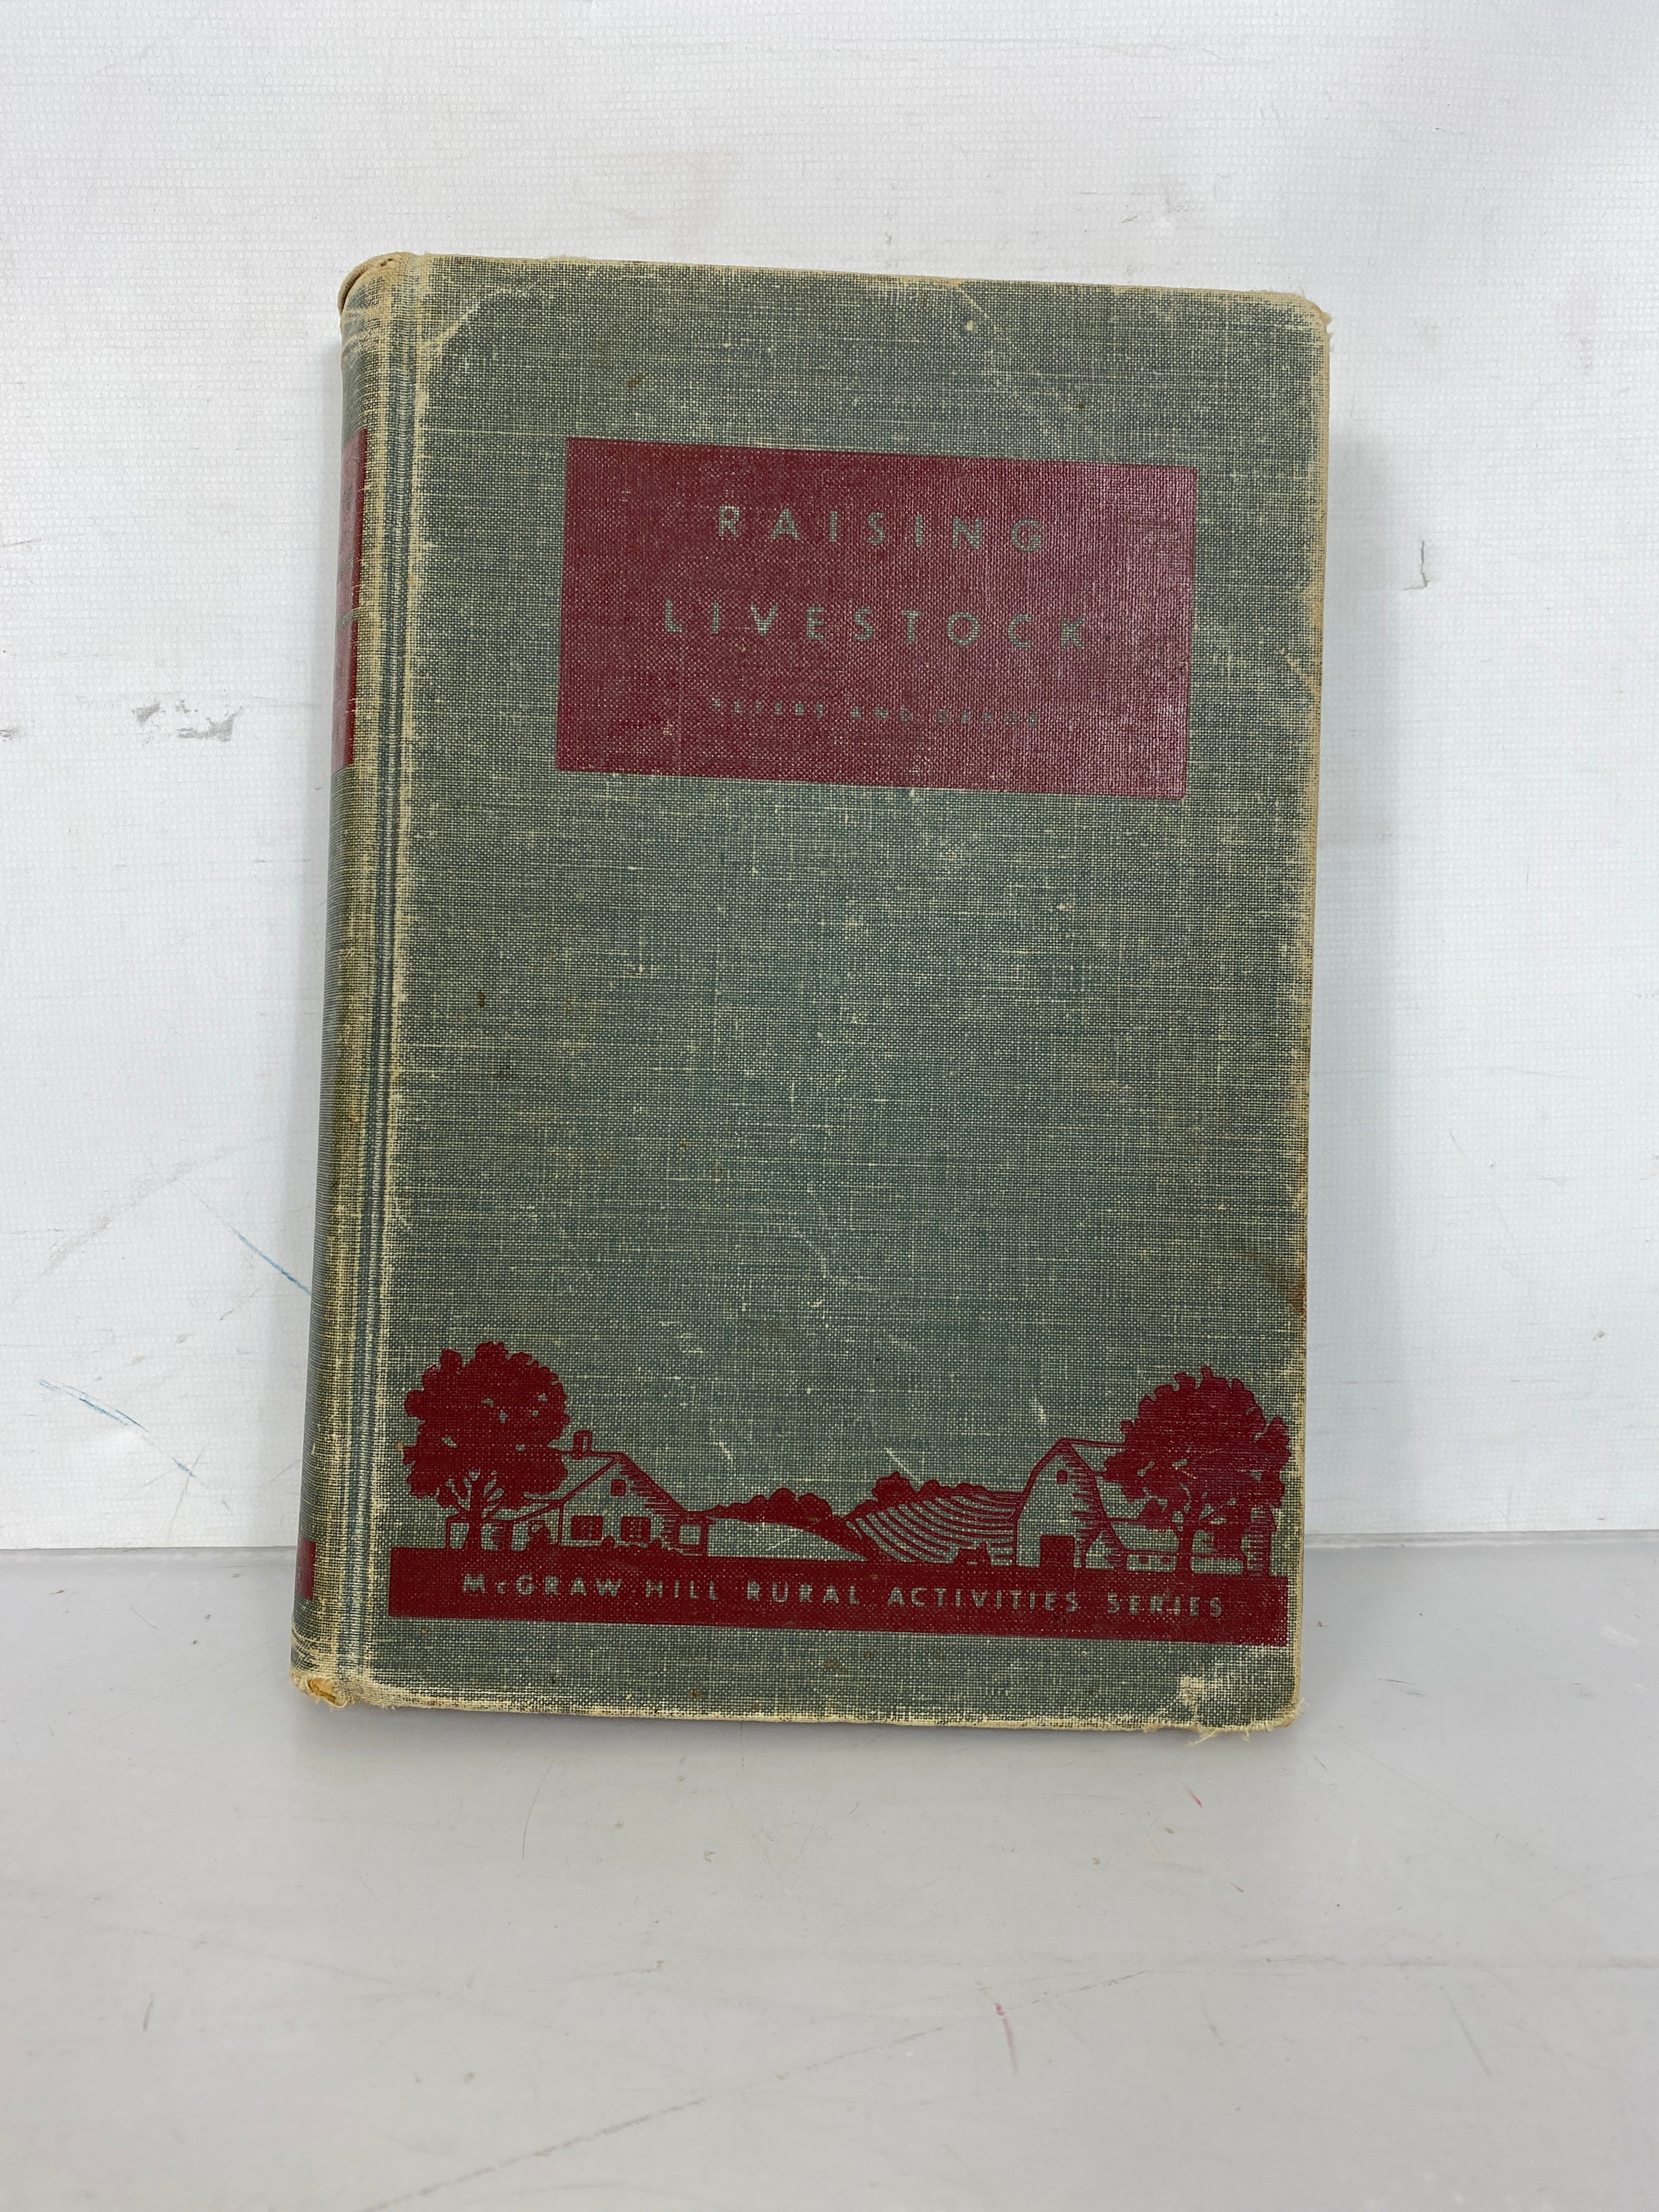 Raising Livestock by Peters and Deyoe First Edition Eighth Printing 1946 HC